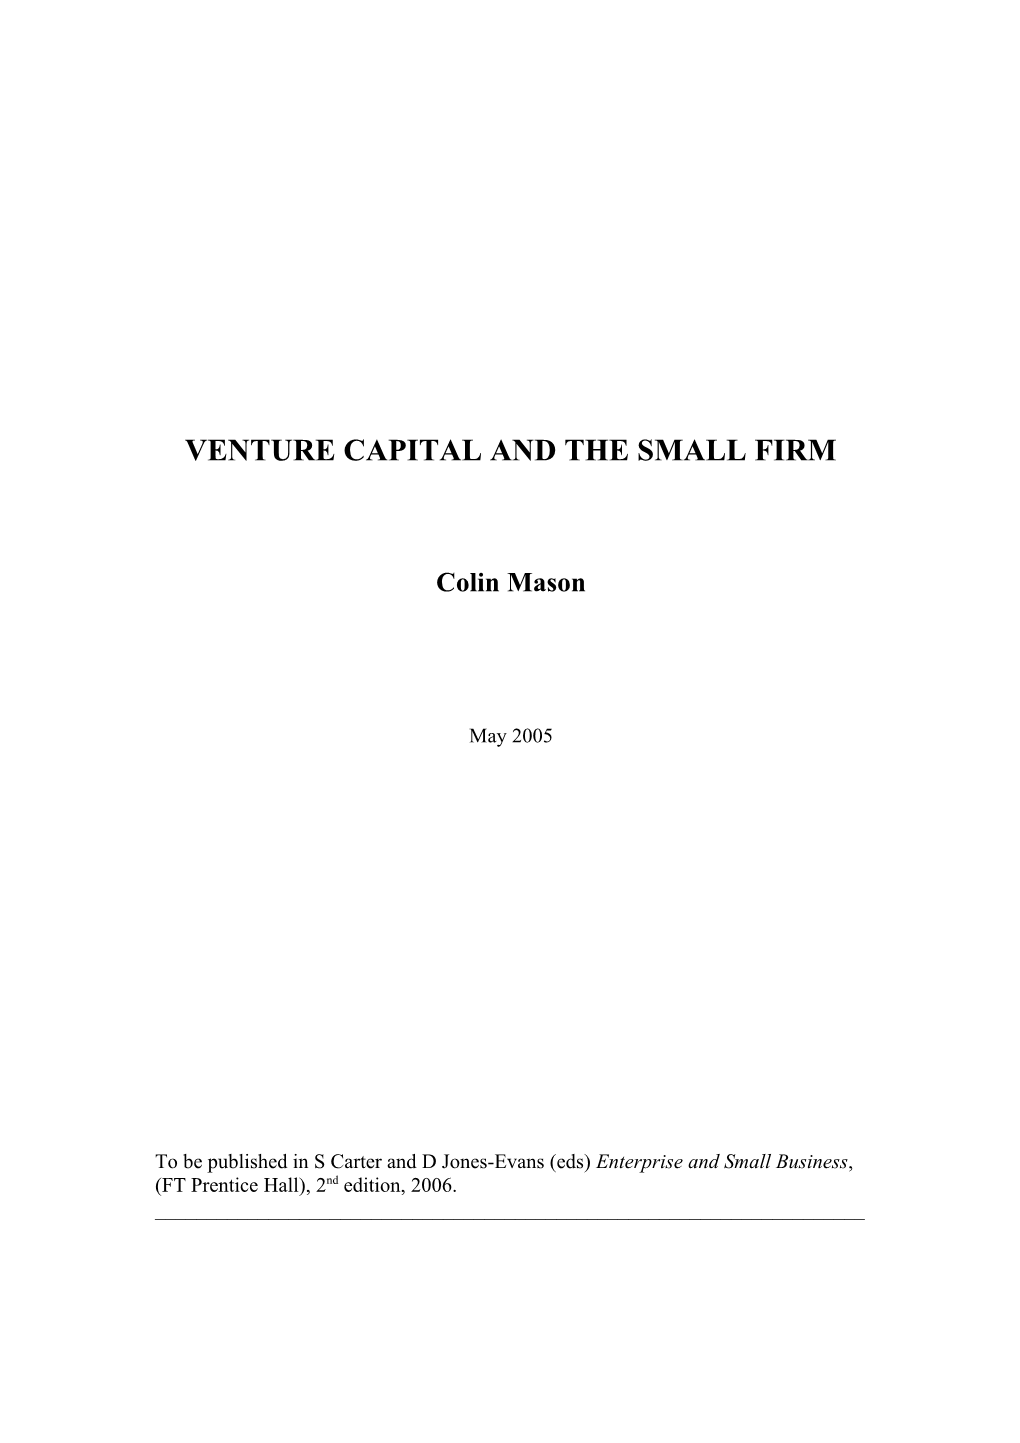 Venture Capital and the Small Firm